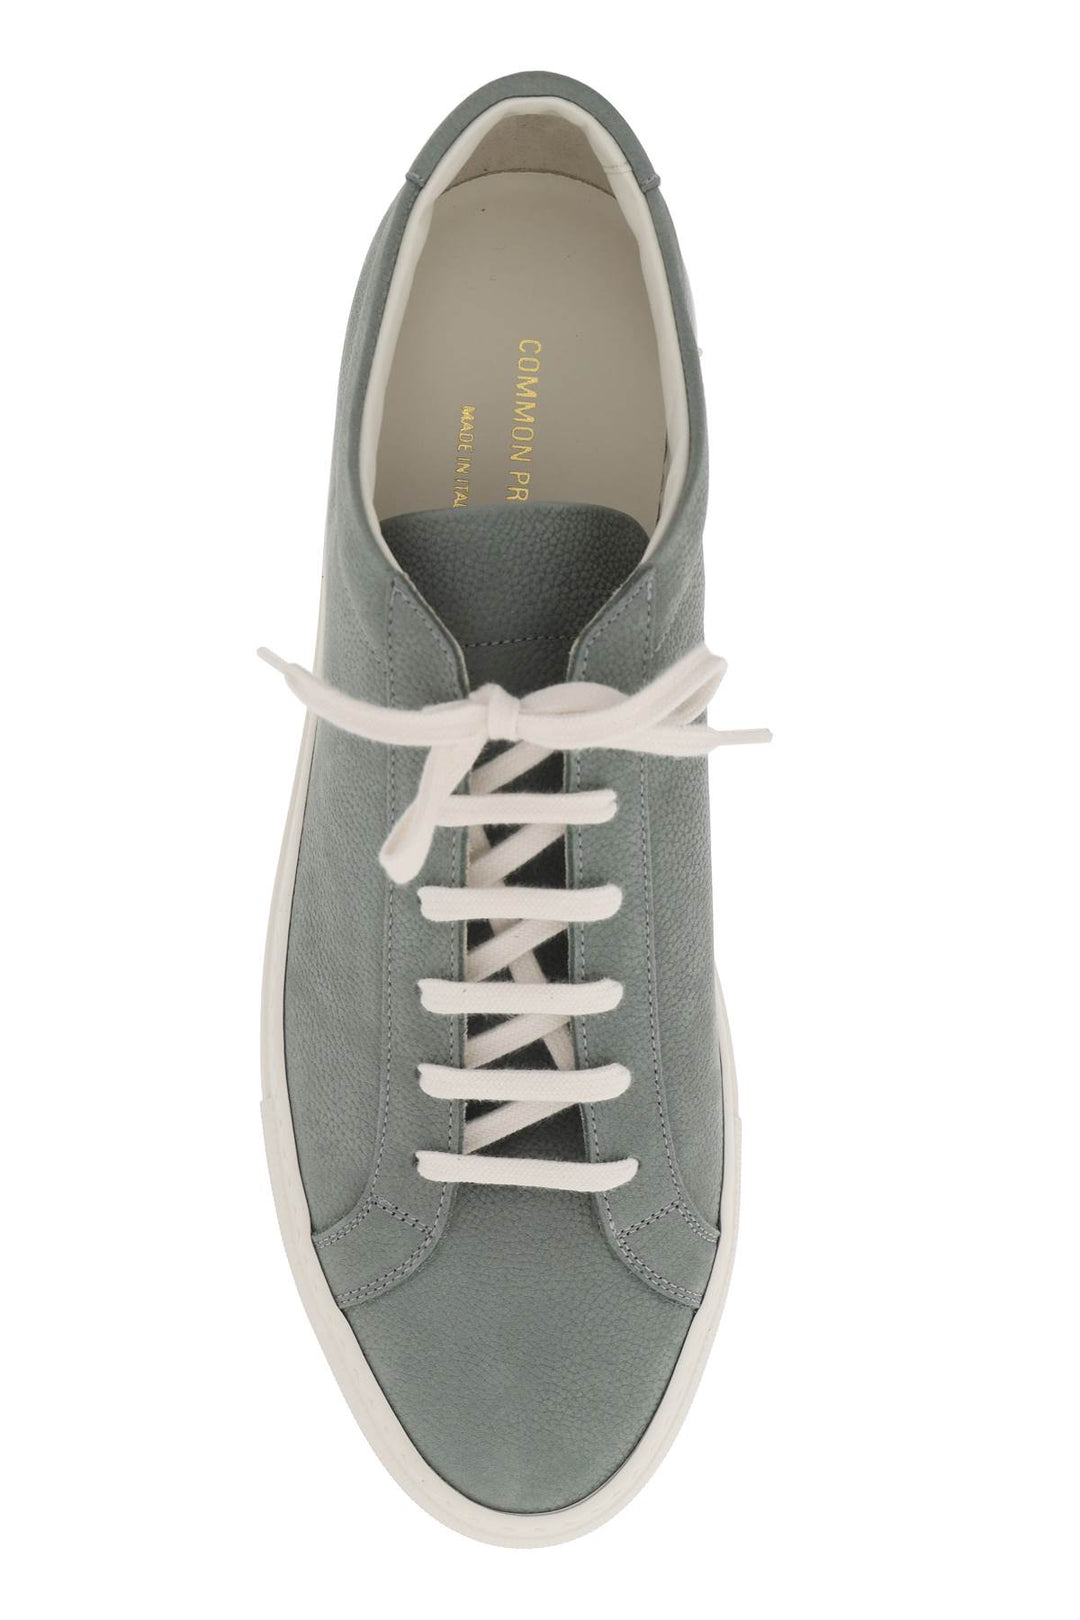 Common Projects Original Achilles Leather Sneakers   Verde